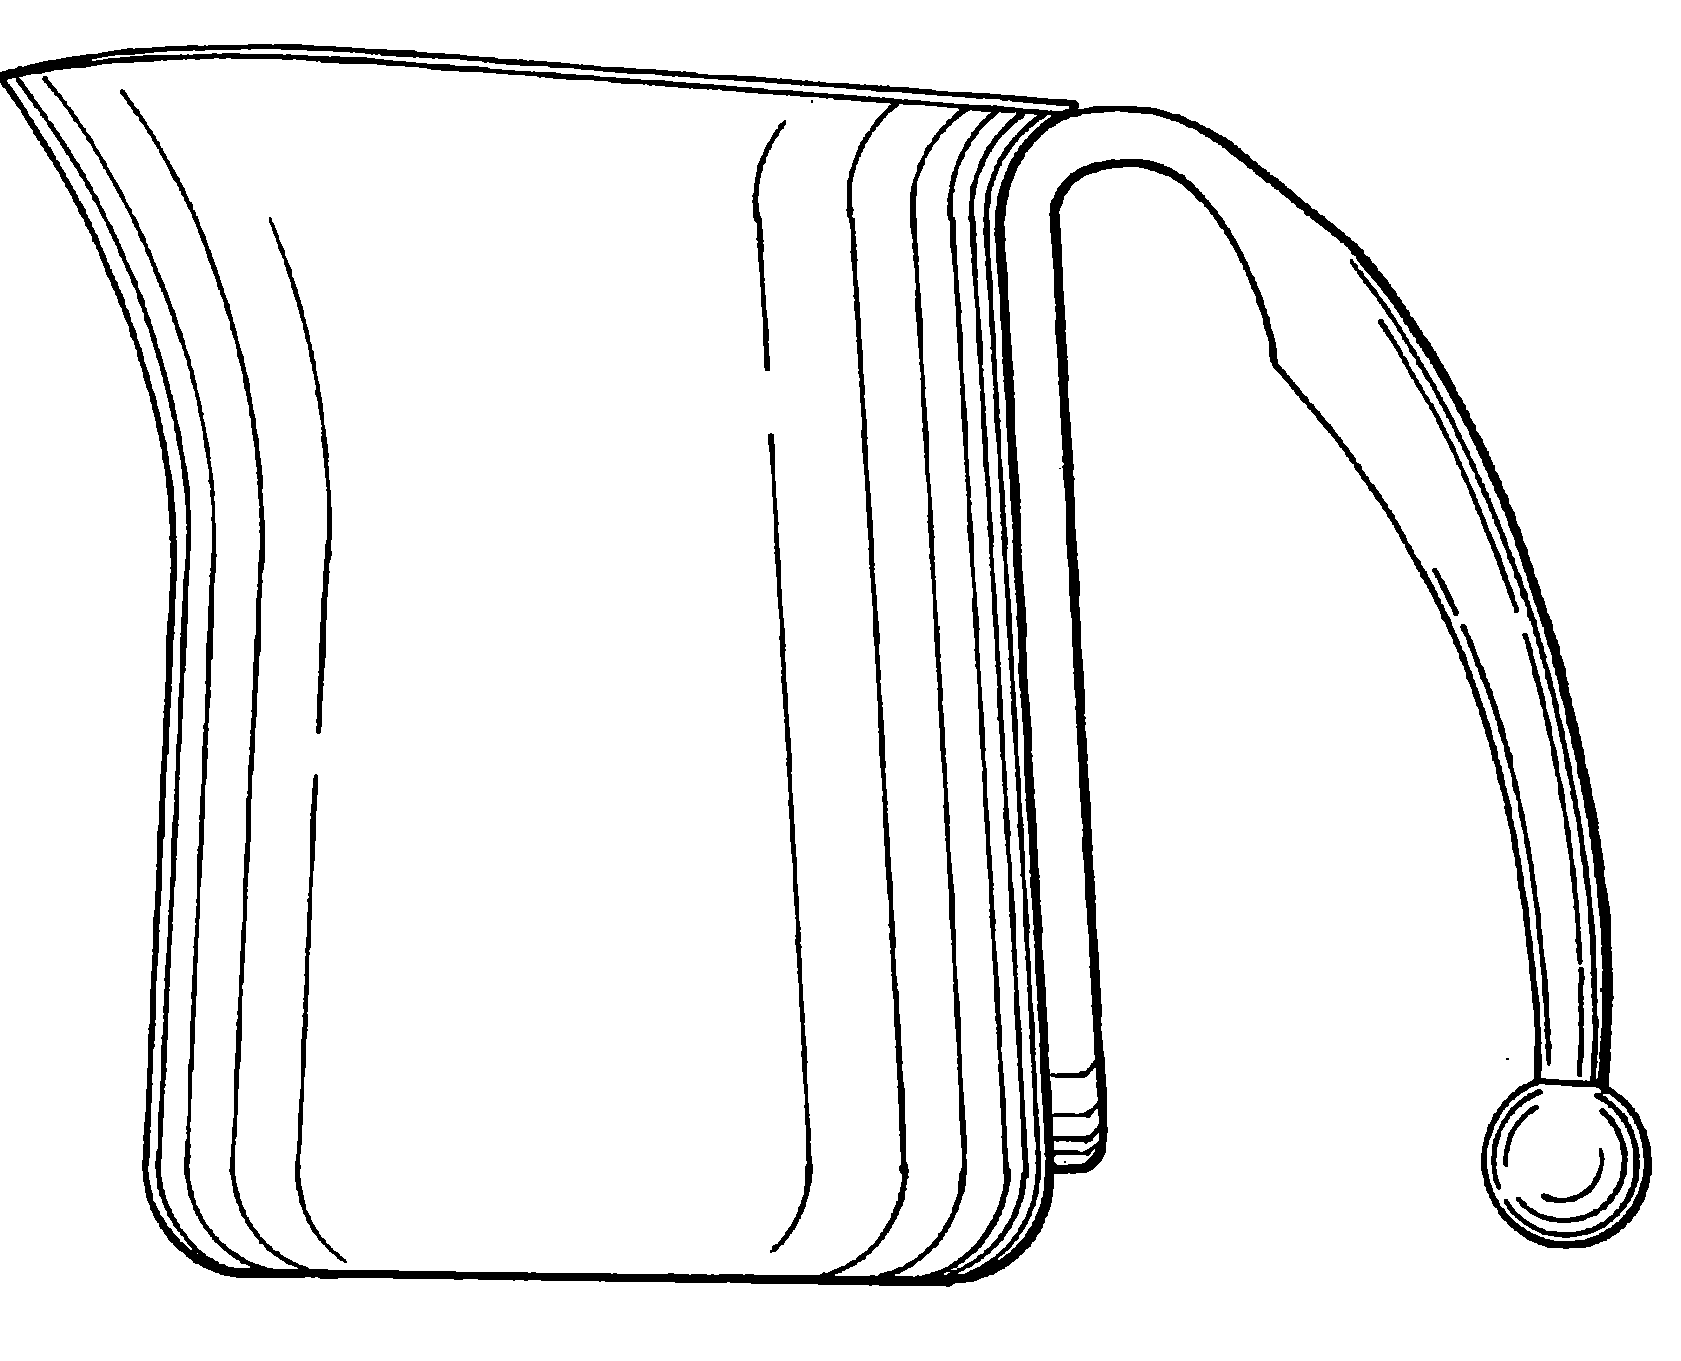 Example of a design for a liquid dispenser with rim-mountedpouring lip and handle.
